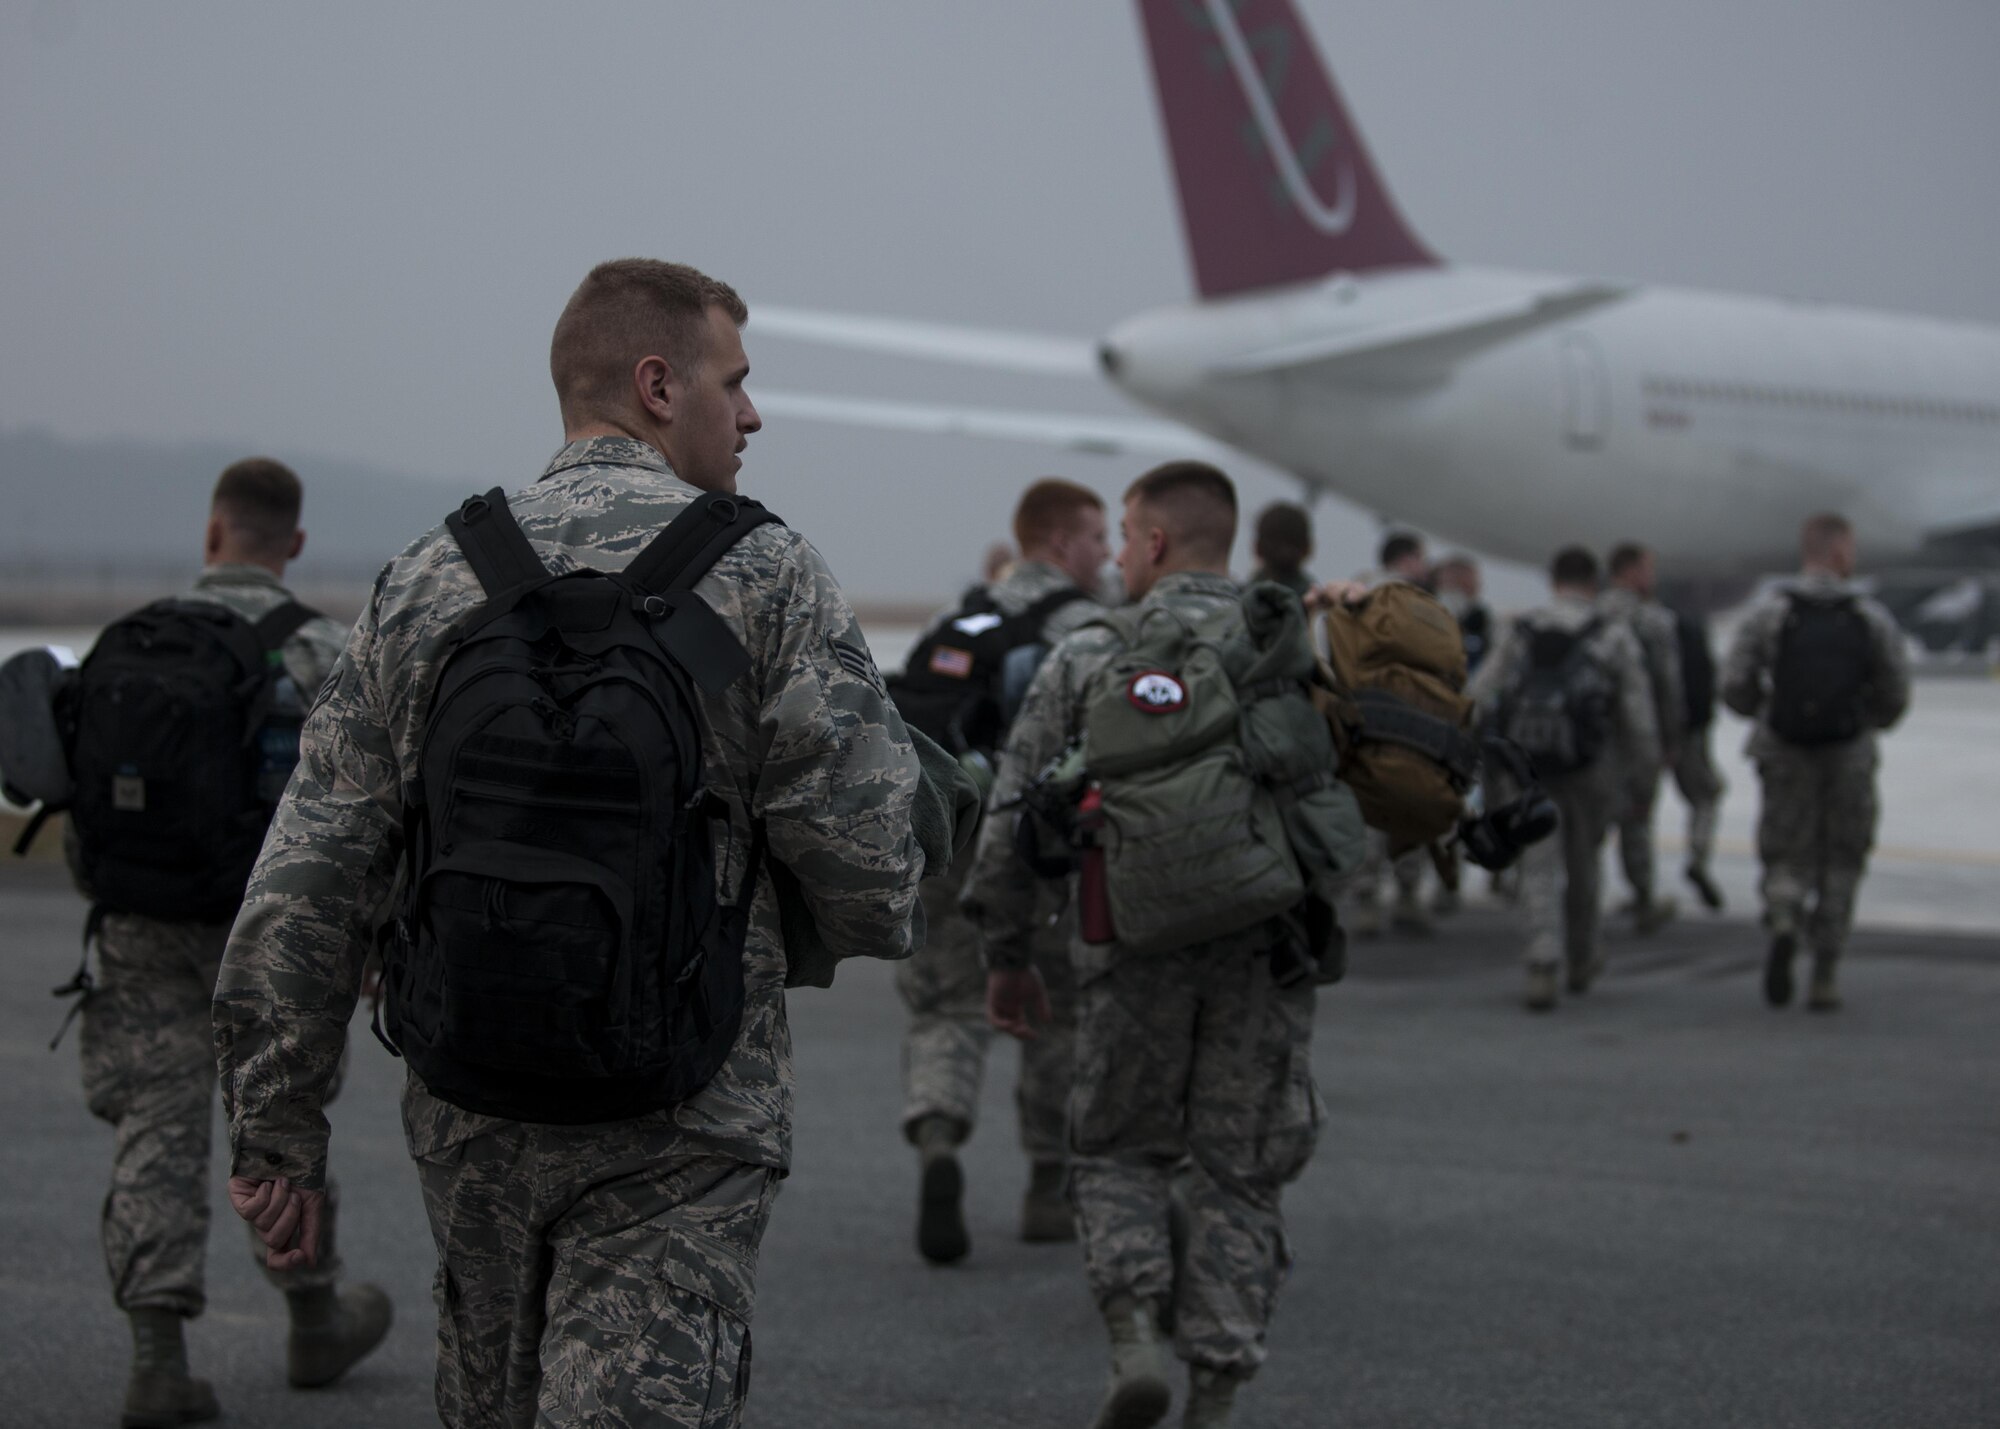 U.S. Air Force Airmen assigned to the Wisconsin Air National Guard 115th Fighter Wing, prepare to depart the installation at Kunsan Air Base, Republic of Korea, Nov. 8, 2017.  The 115th FW participated in a three-month Theater Security Package rotational Deployment to Kunsan AB as part of maintaining peace and security in the Indo-Asia-Pacific region. (U.S. Air Force photo by Staff Sgt. Victoria H. Taylor)